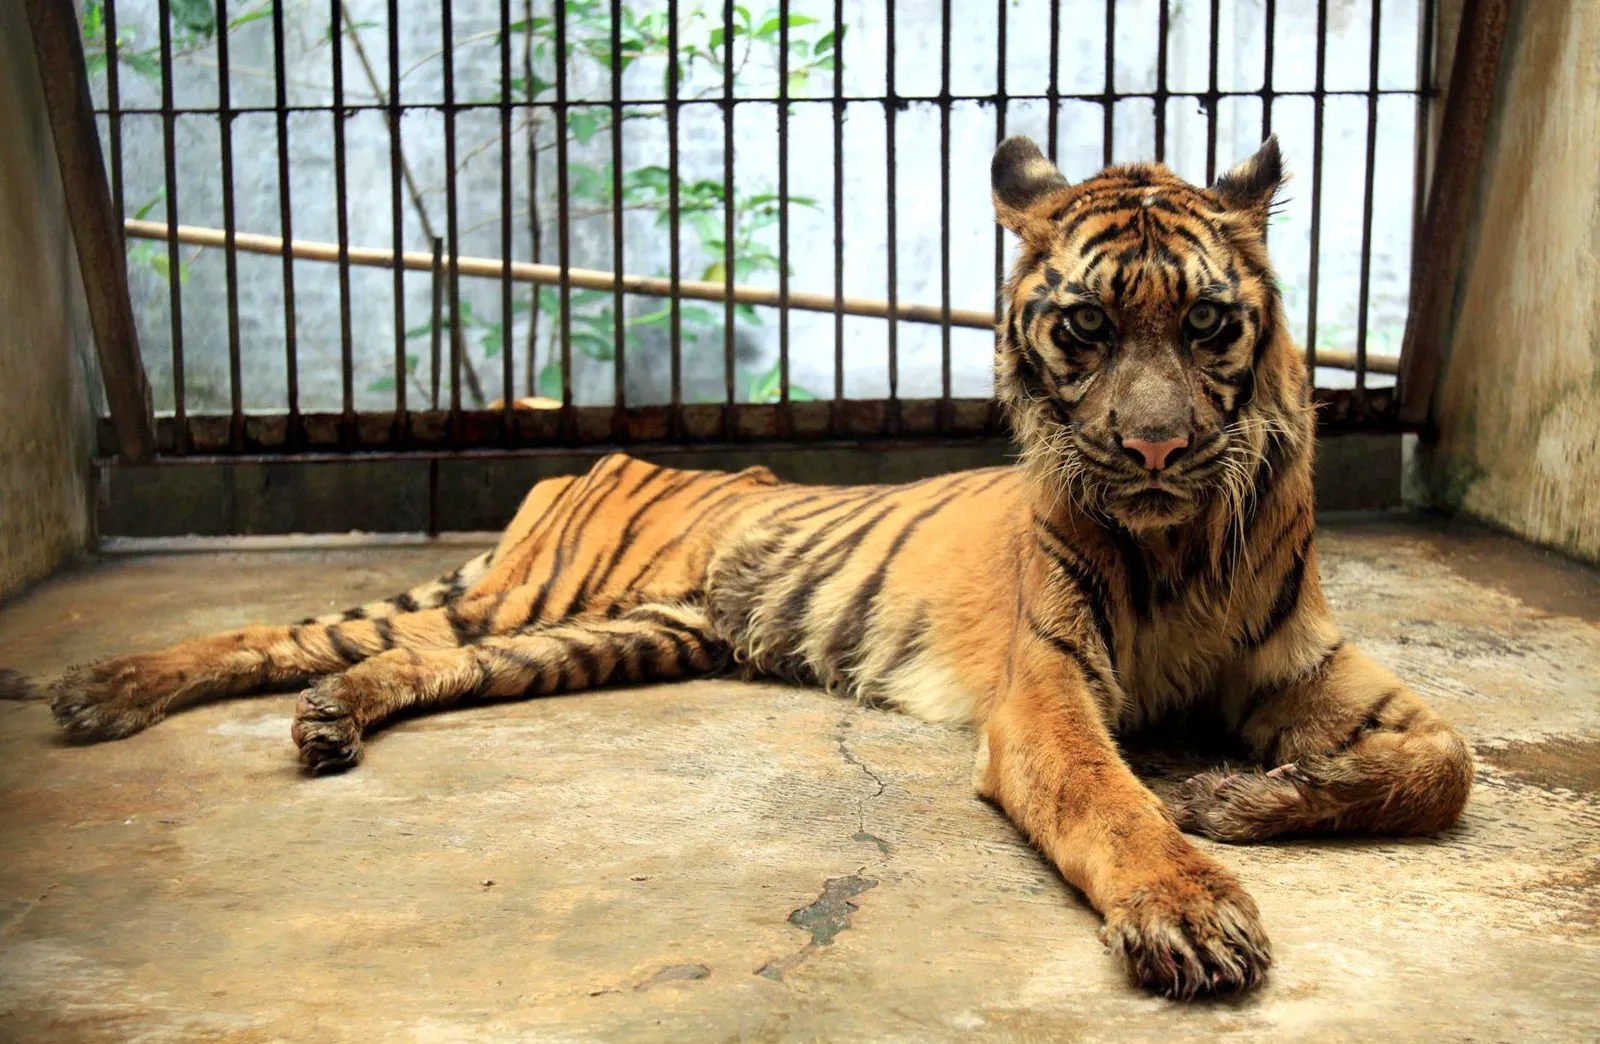 How Indonesia's “Death Zoo” Got Its Grisly Reputation | Smart News ...